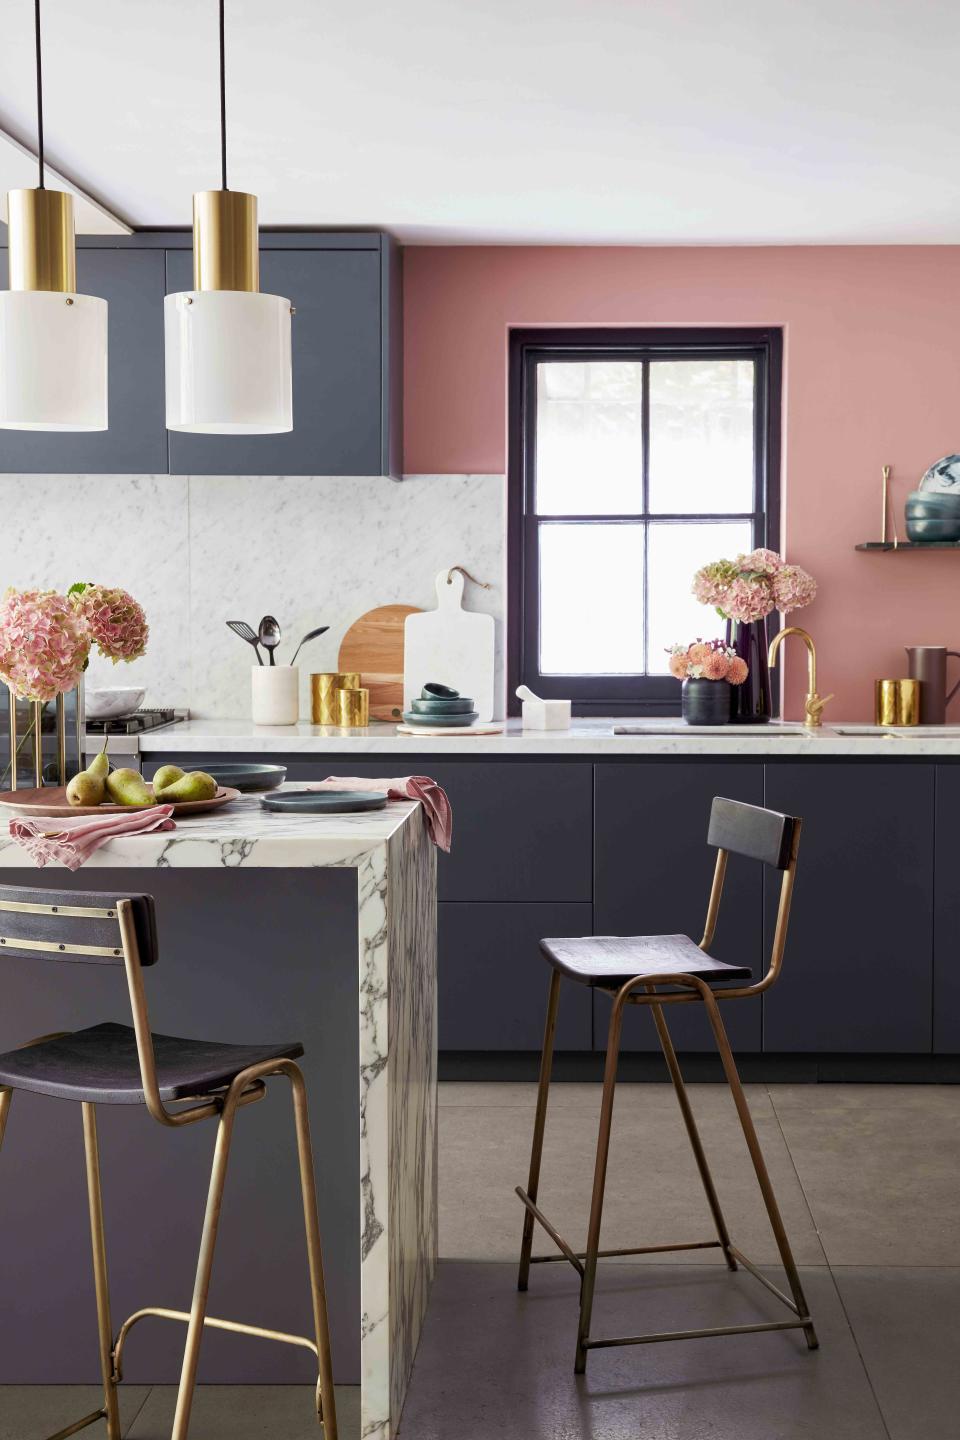 Top 10 rising kitchen colour trends this year